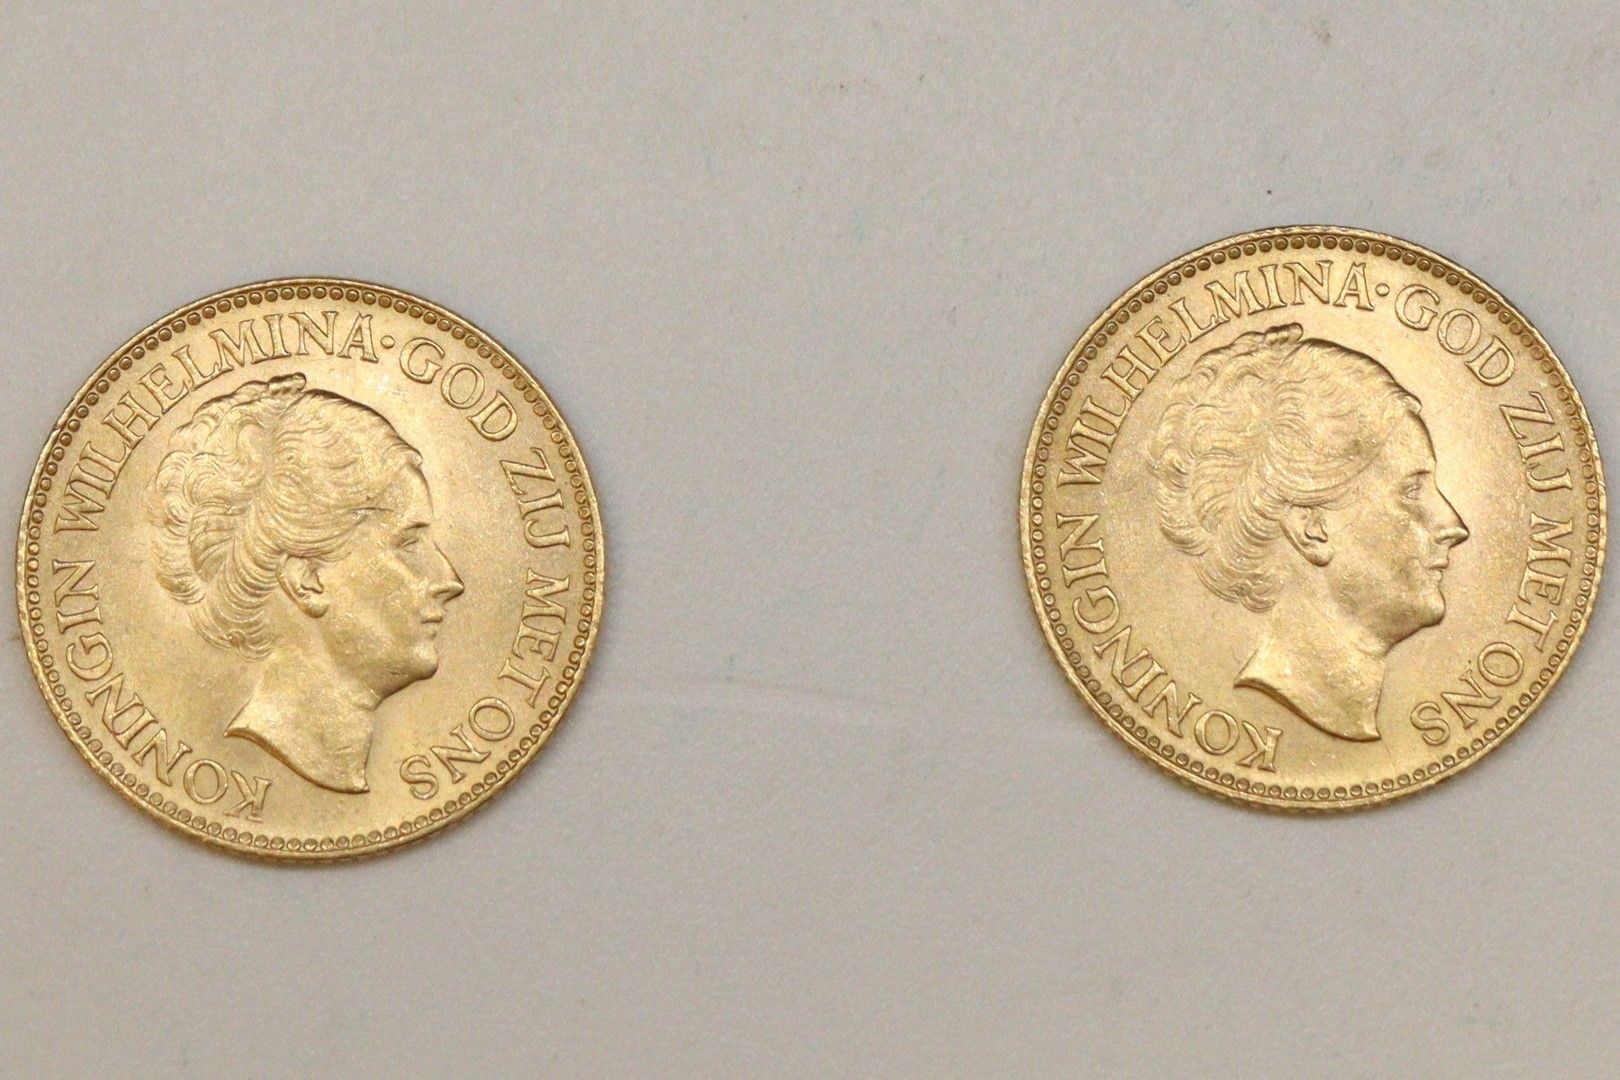 Null Lot of two gold coins of 10 Gulden - Wilhelmina I (1932 x 2)

TTB to SUP. 
&hellip;